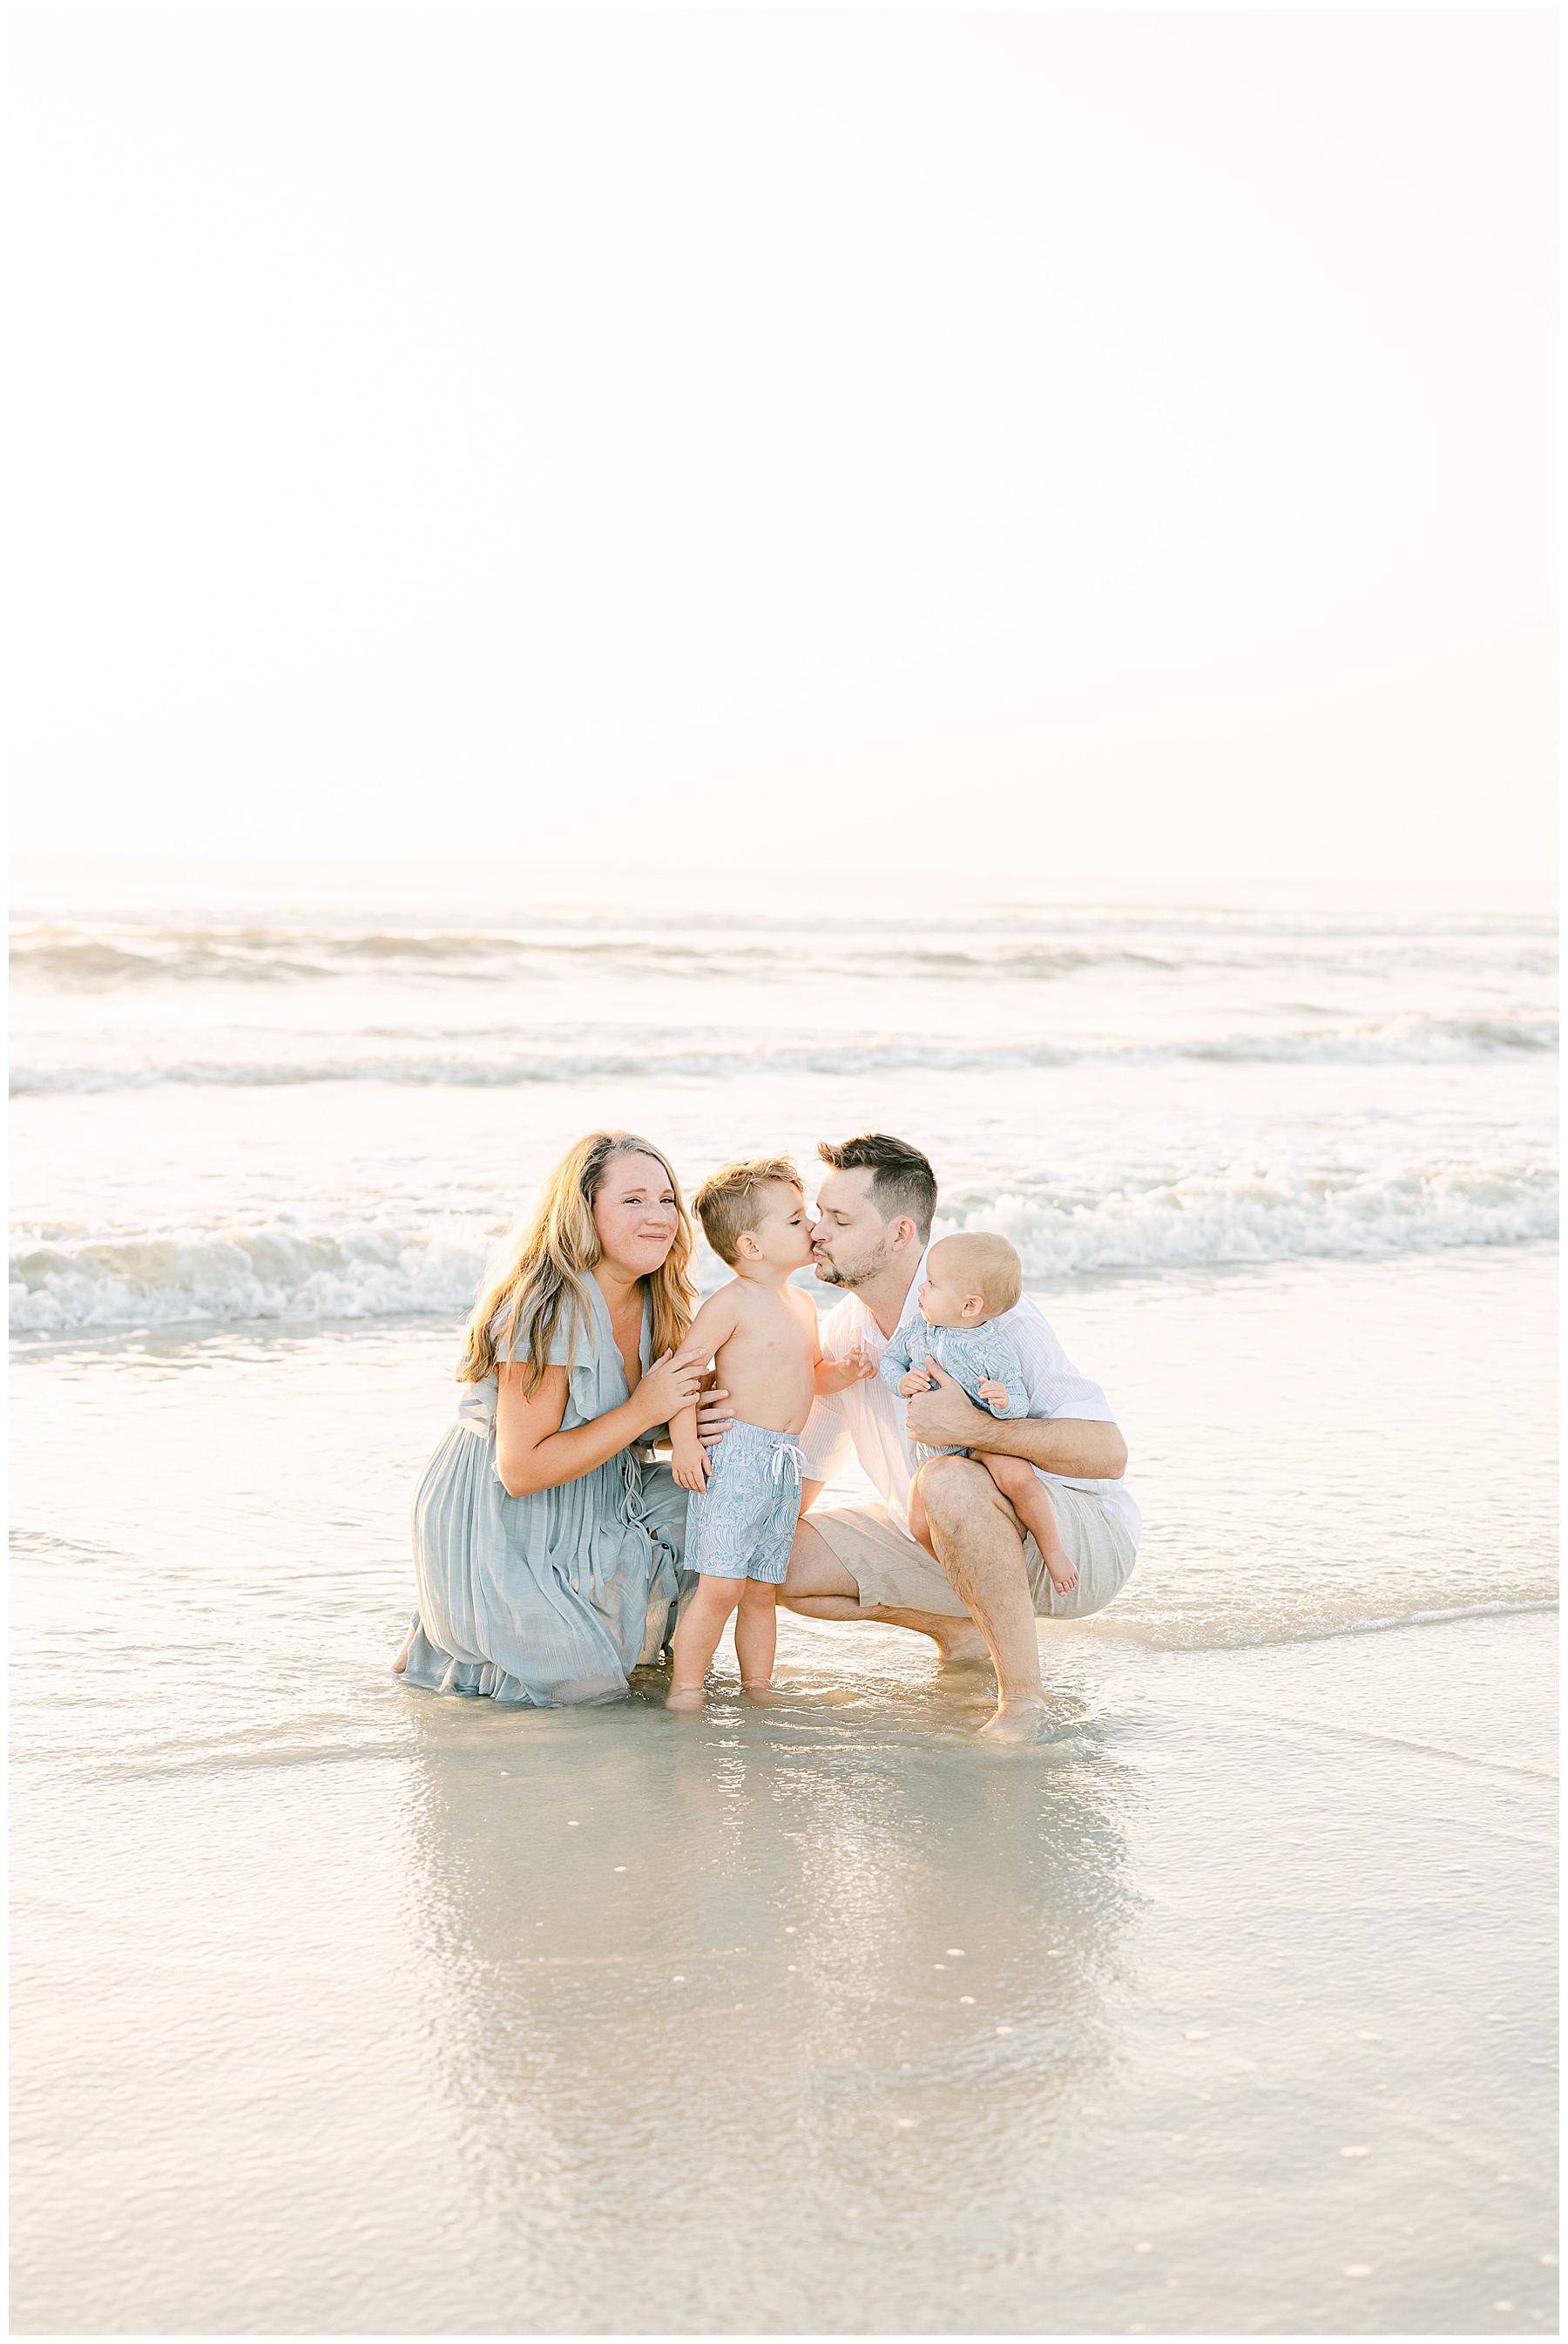 family wearing pastel colors kissing each other in the water at sunrise on the beach